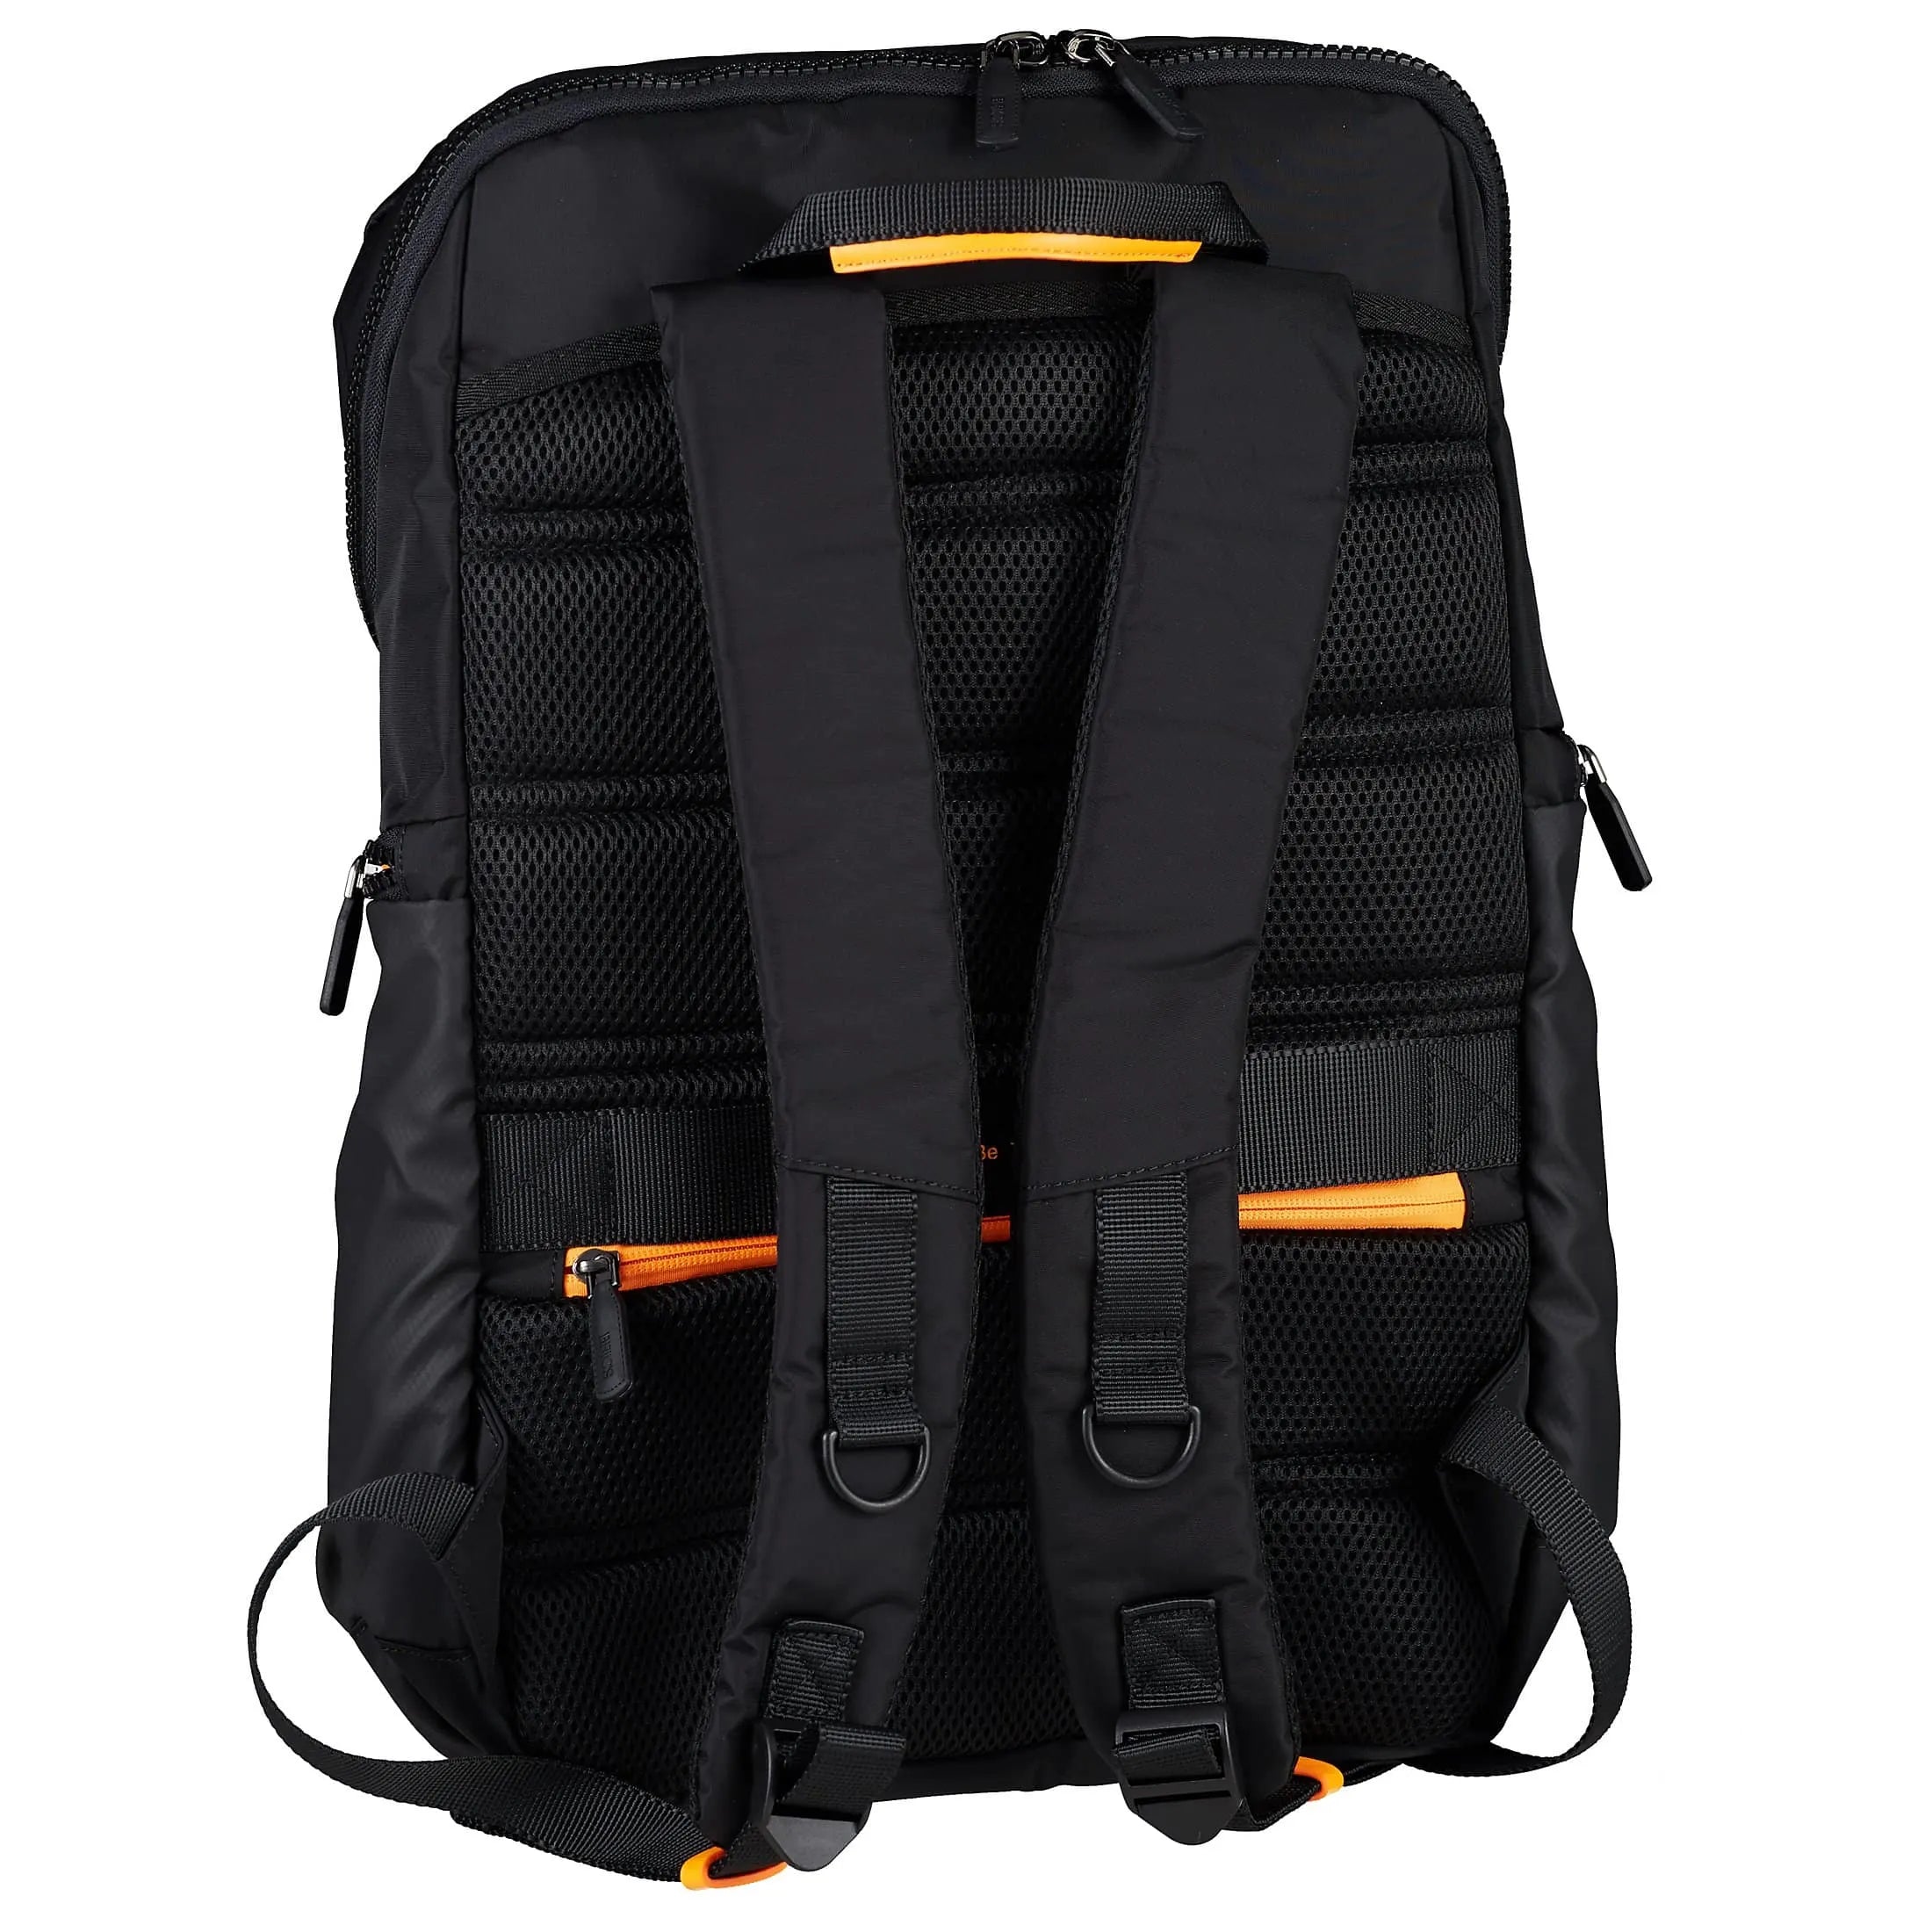 BY by Brics Eolo business backpack 47 cm - black